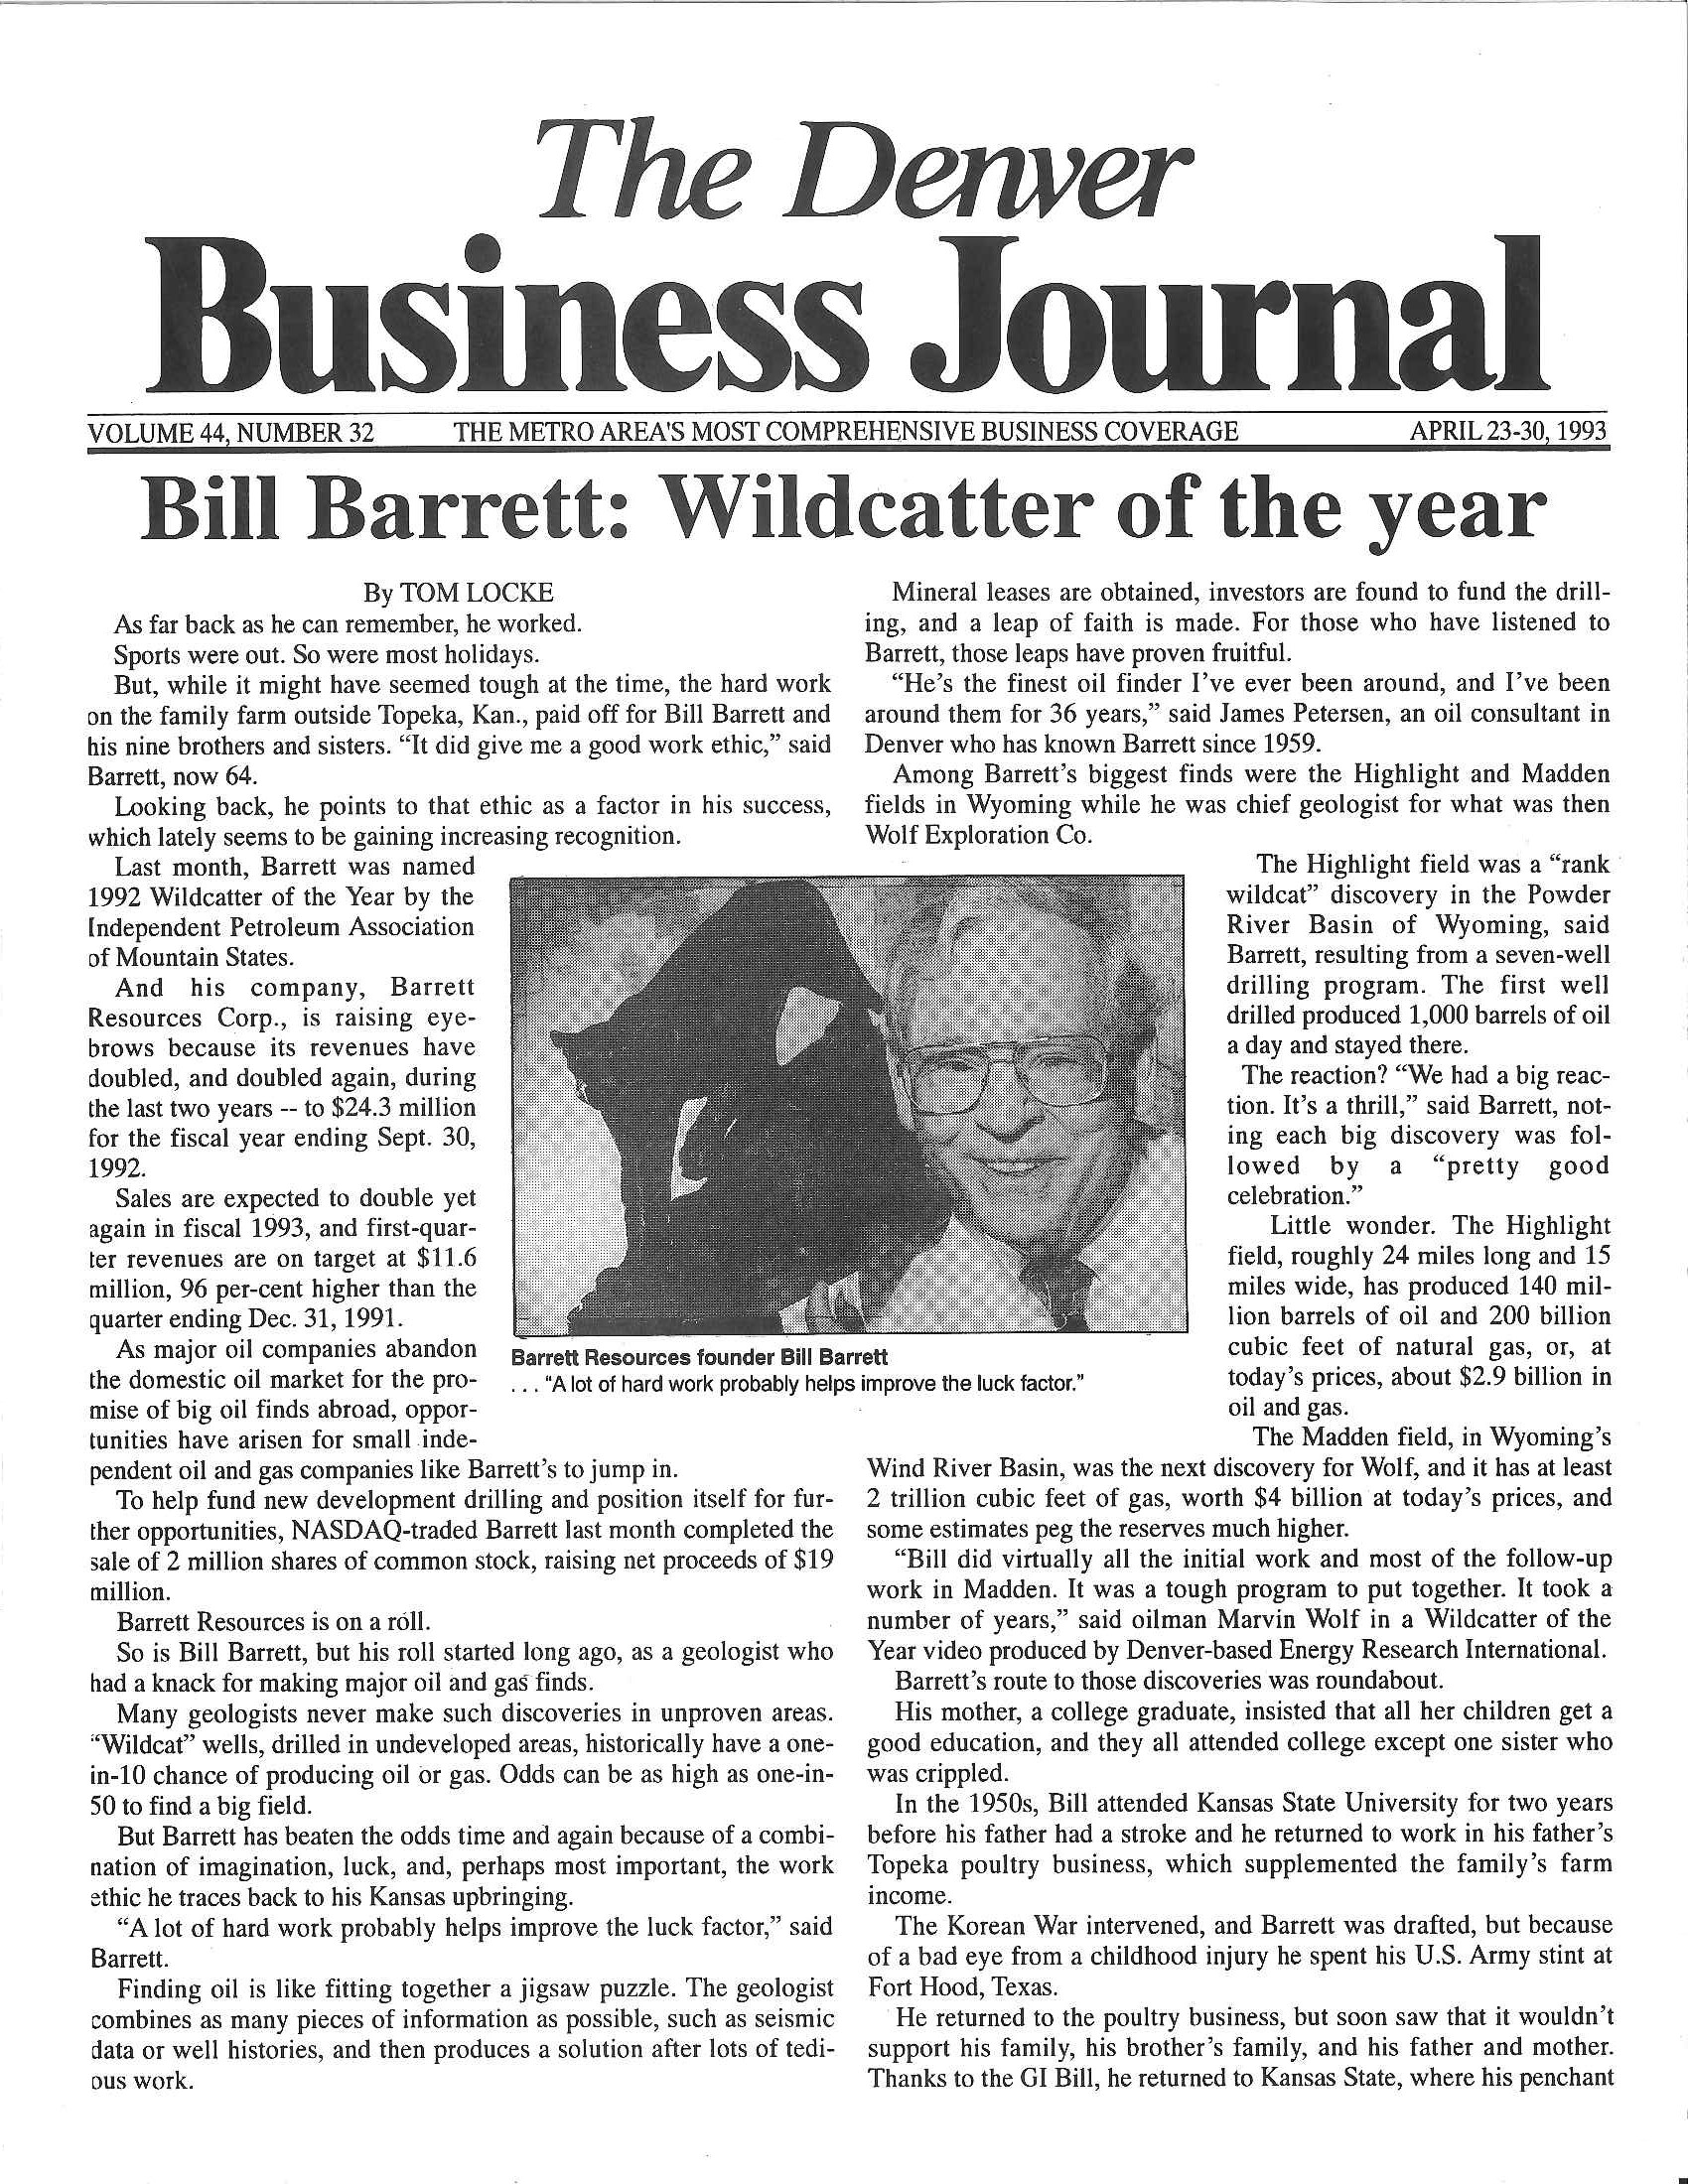 TOP MINDS IN THE BUSINESS: Part II - Bill Barrett Discusses Growth